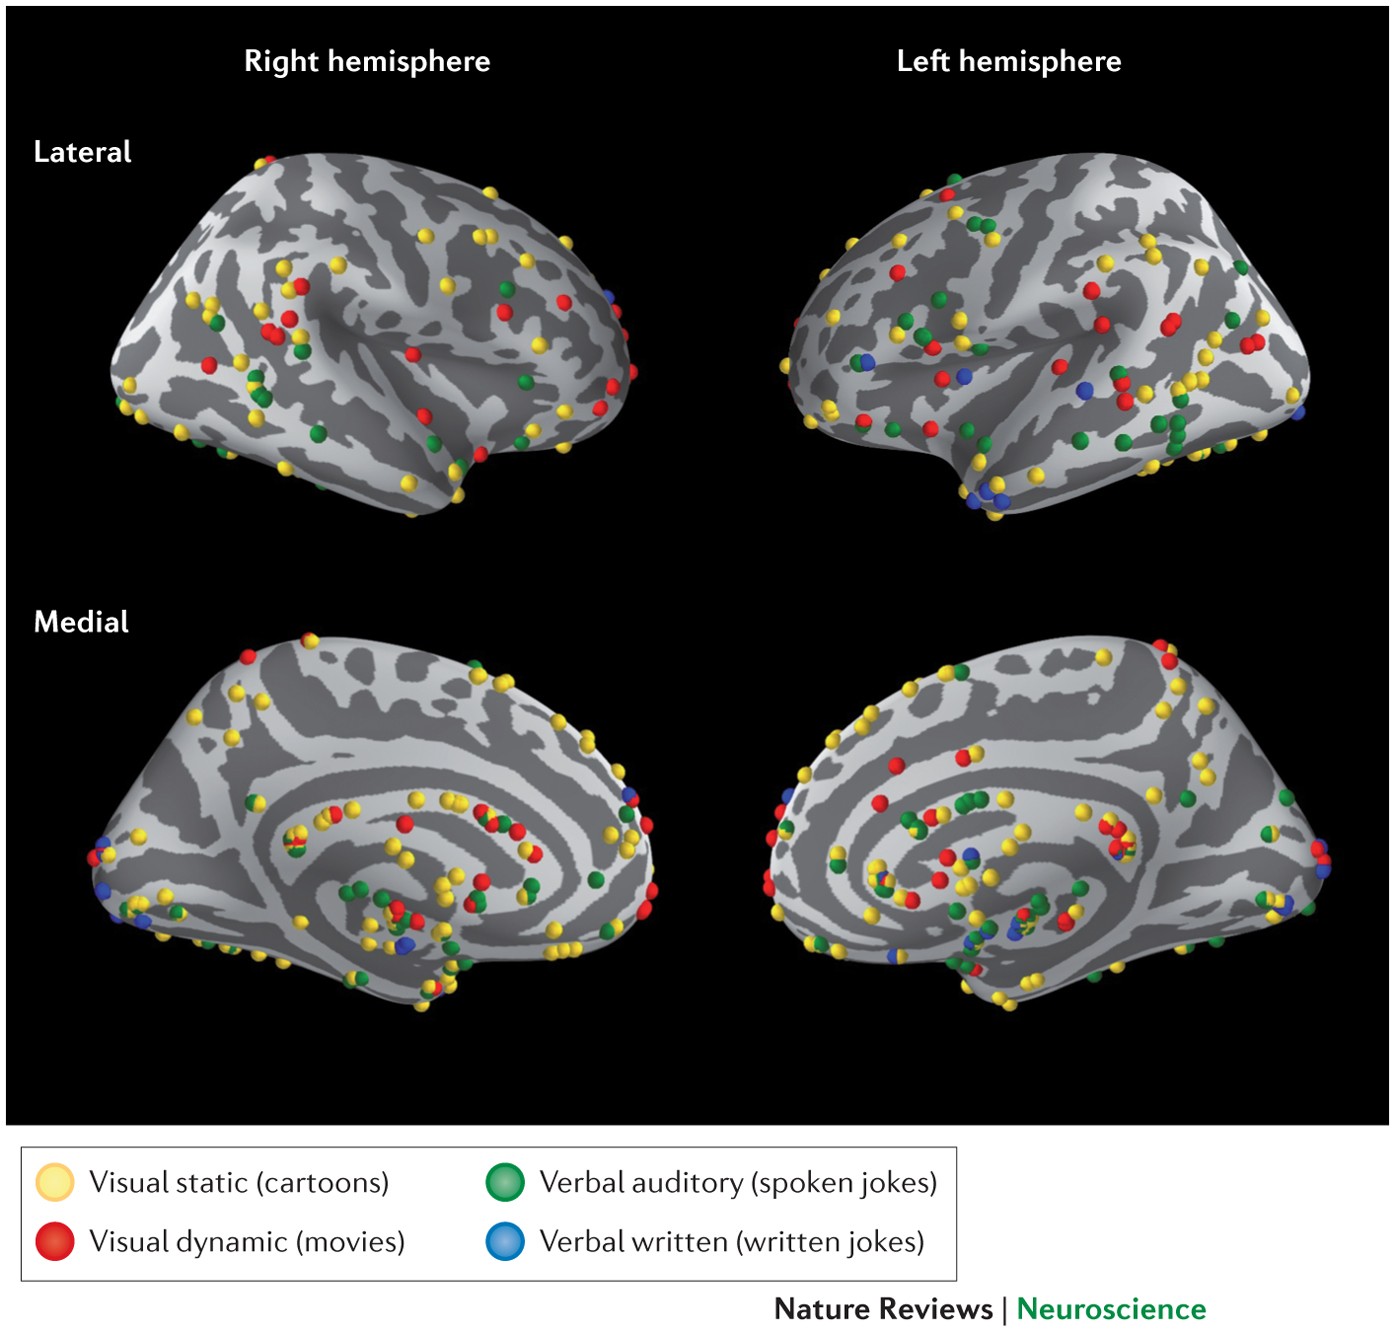 The neural basis of humour processing | Nature Reviews Neuroscience